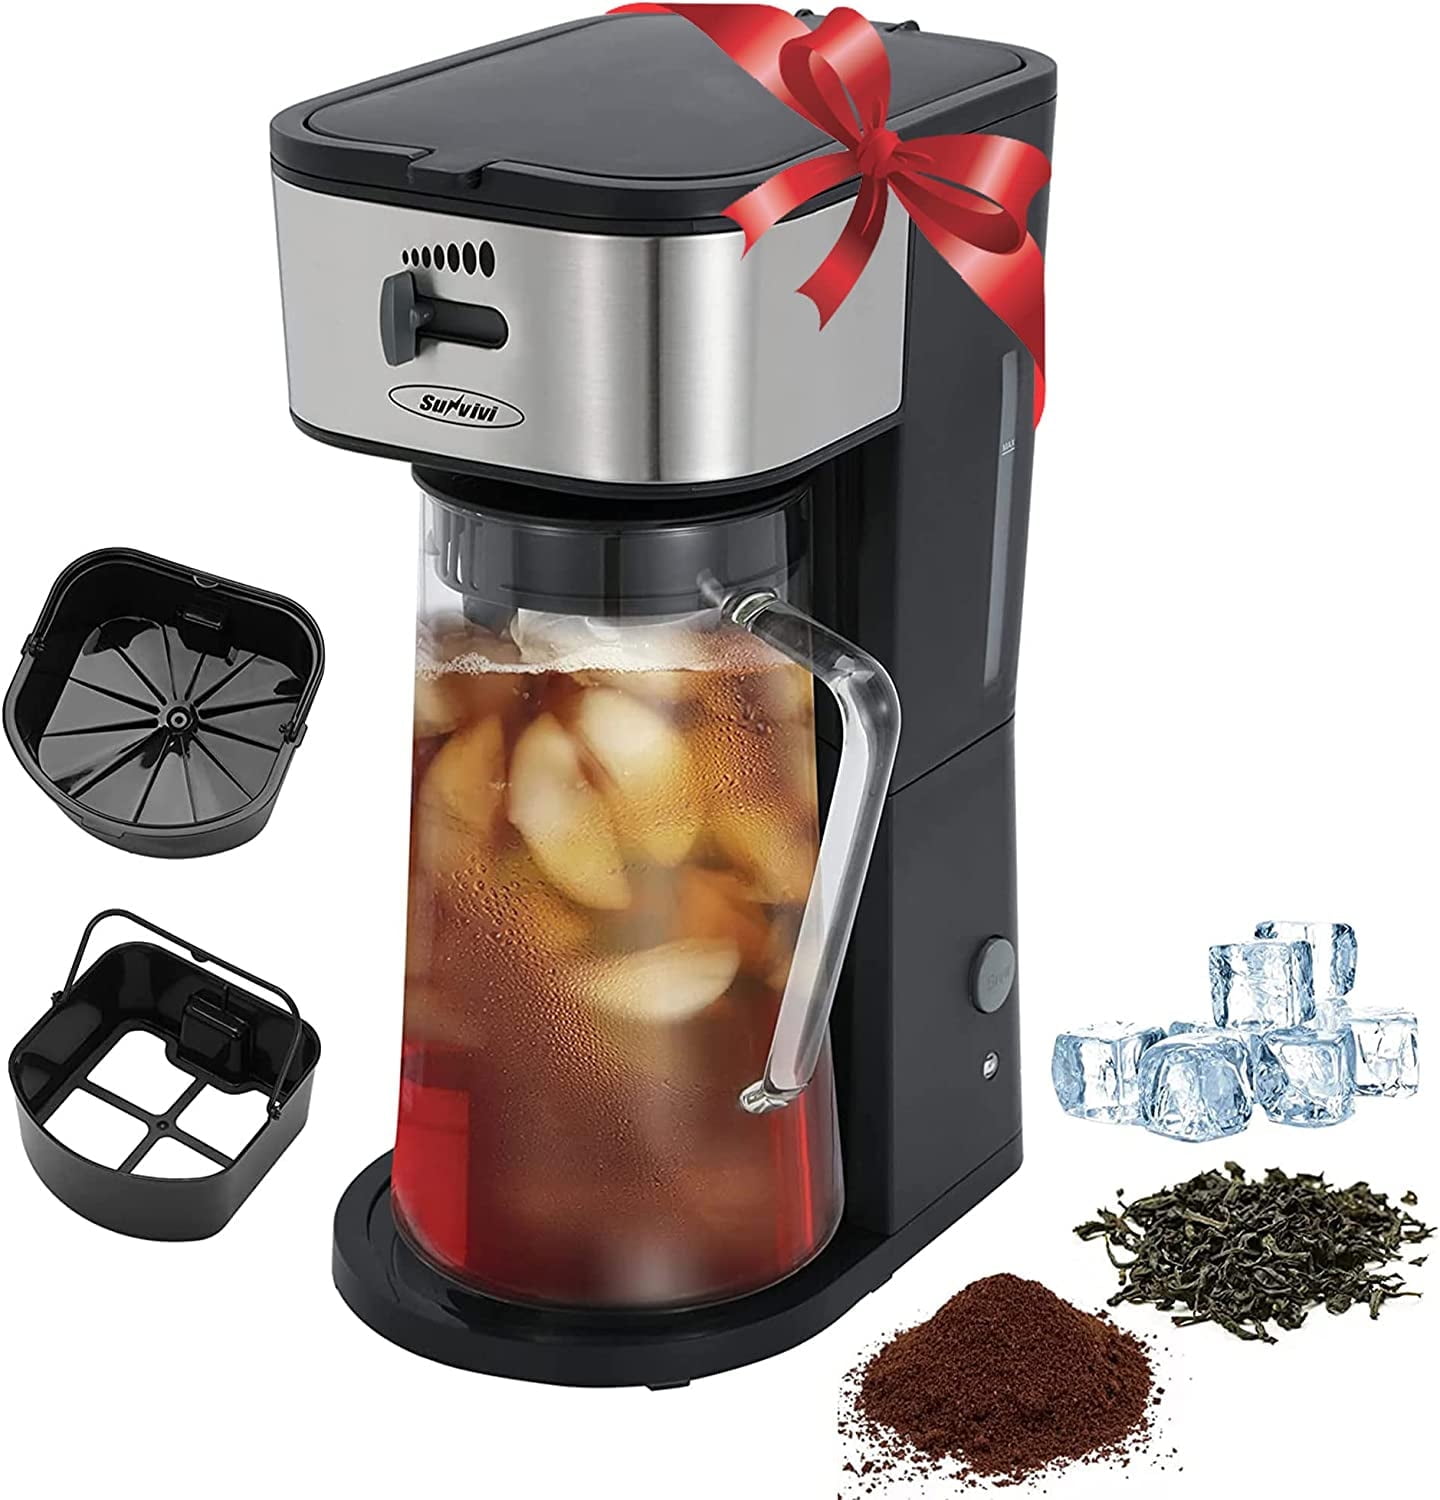 SUNVIVI 3 Quart Iced Tea Coffee Maker with Glass Pitcher,Iced Tea Coffee  Maker with Strength Selector,Stainless Steel, Black 